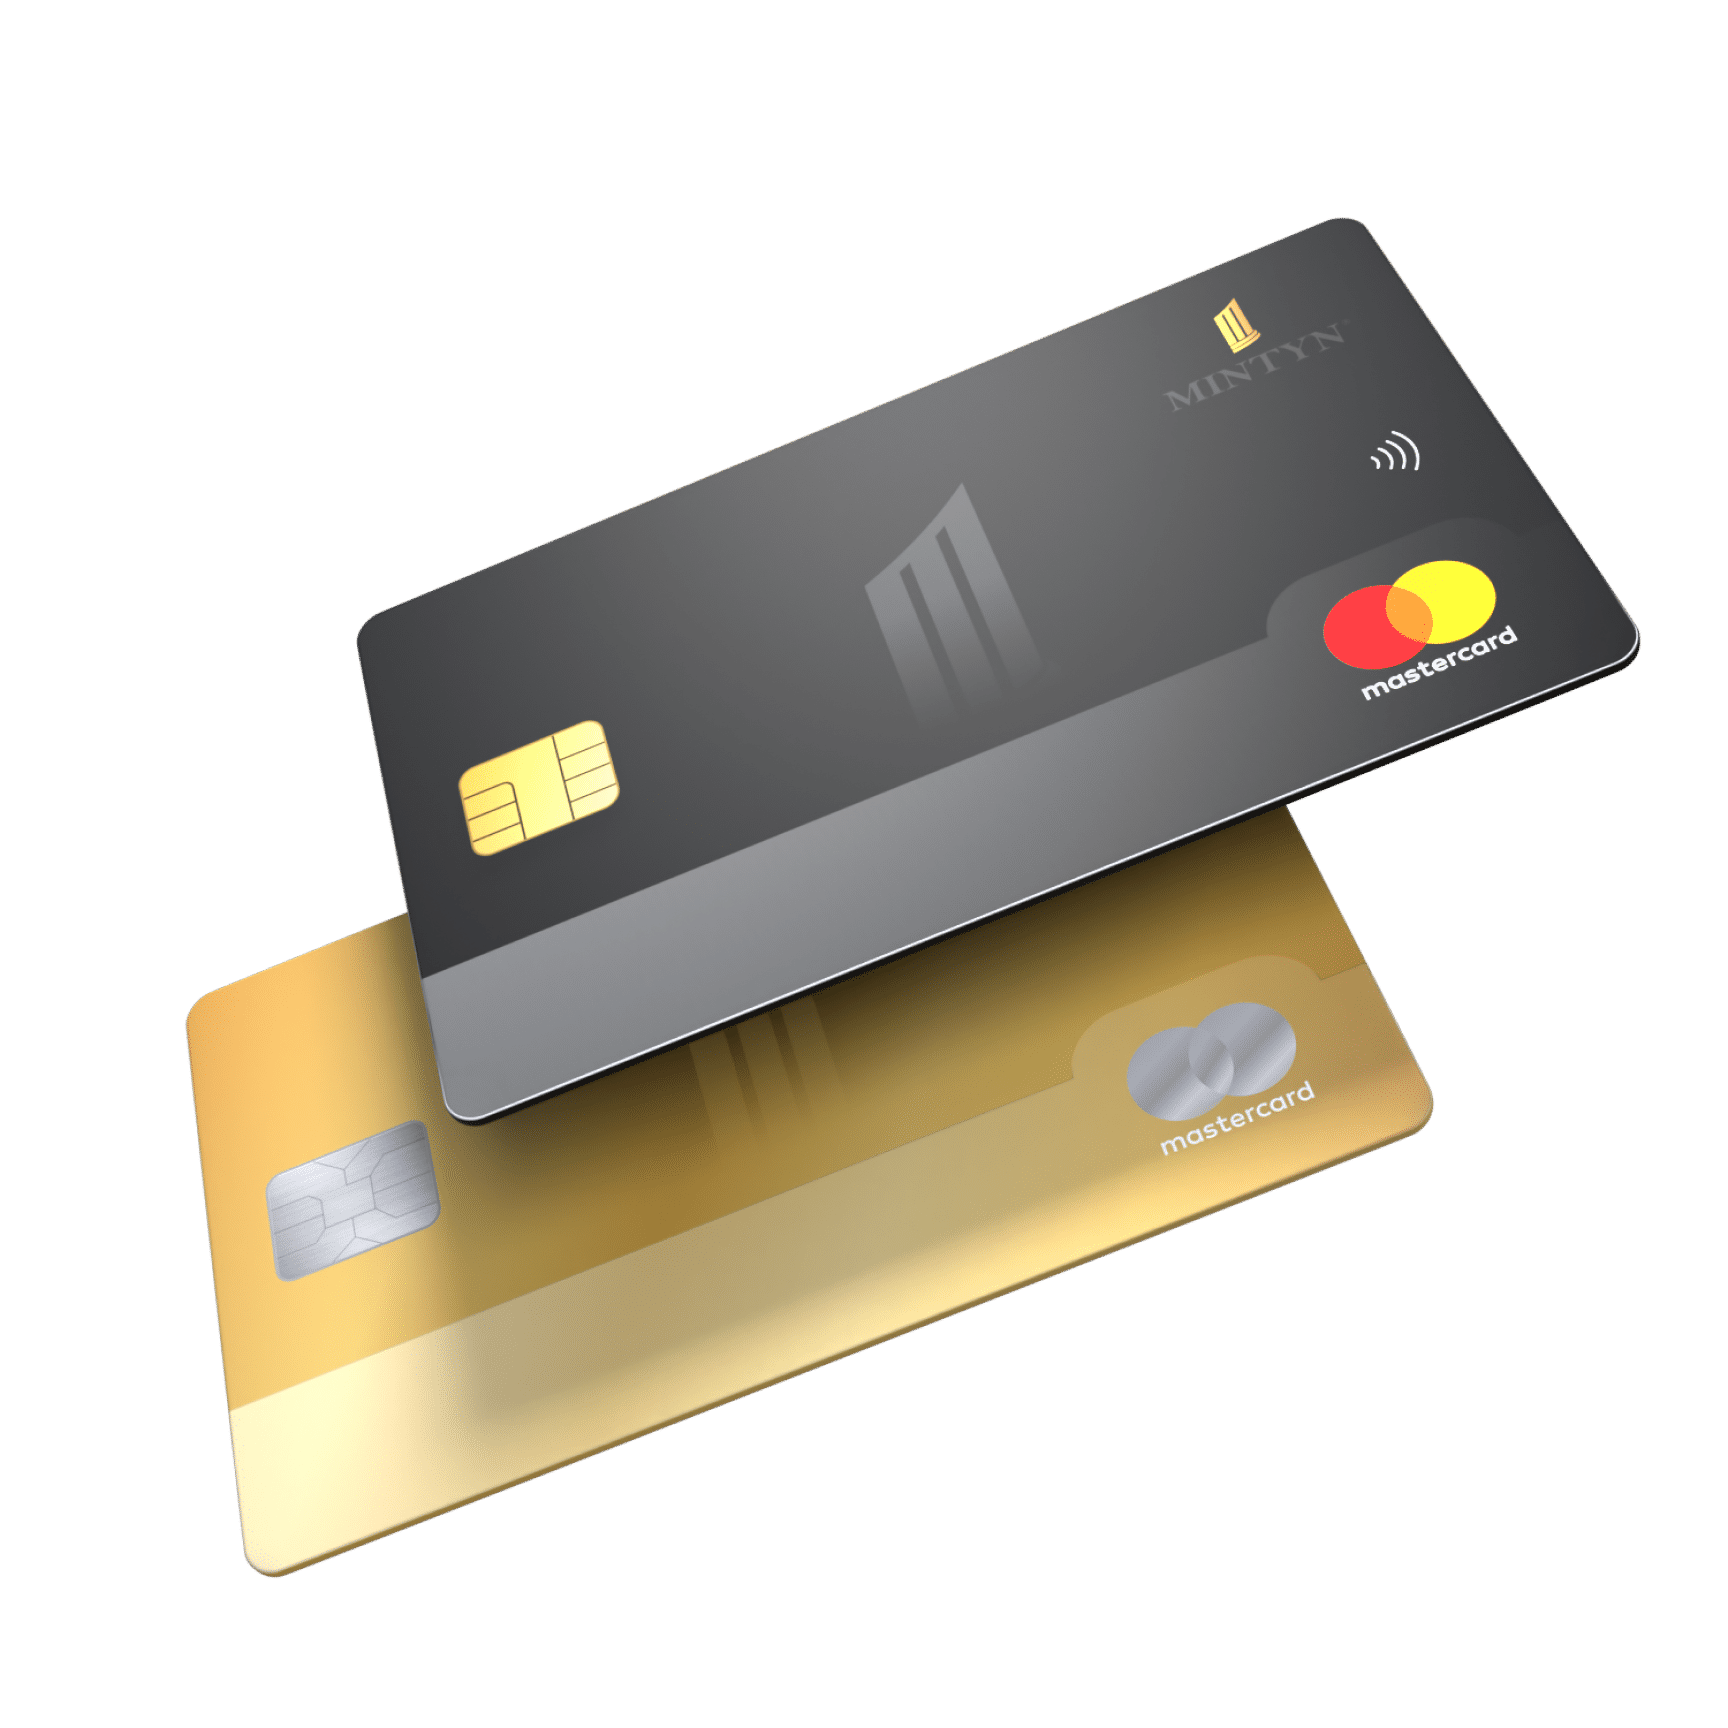 Paying with card or bank transfer?